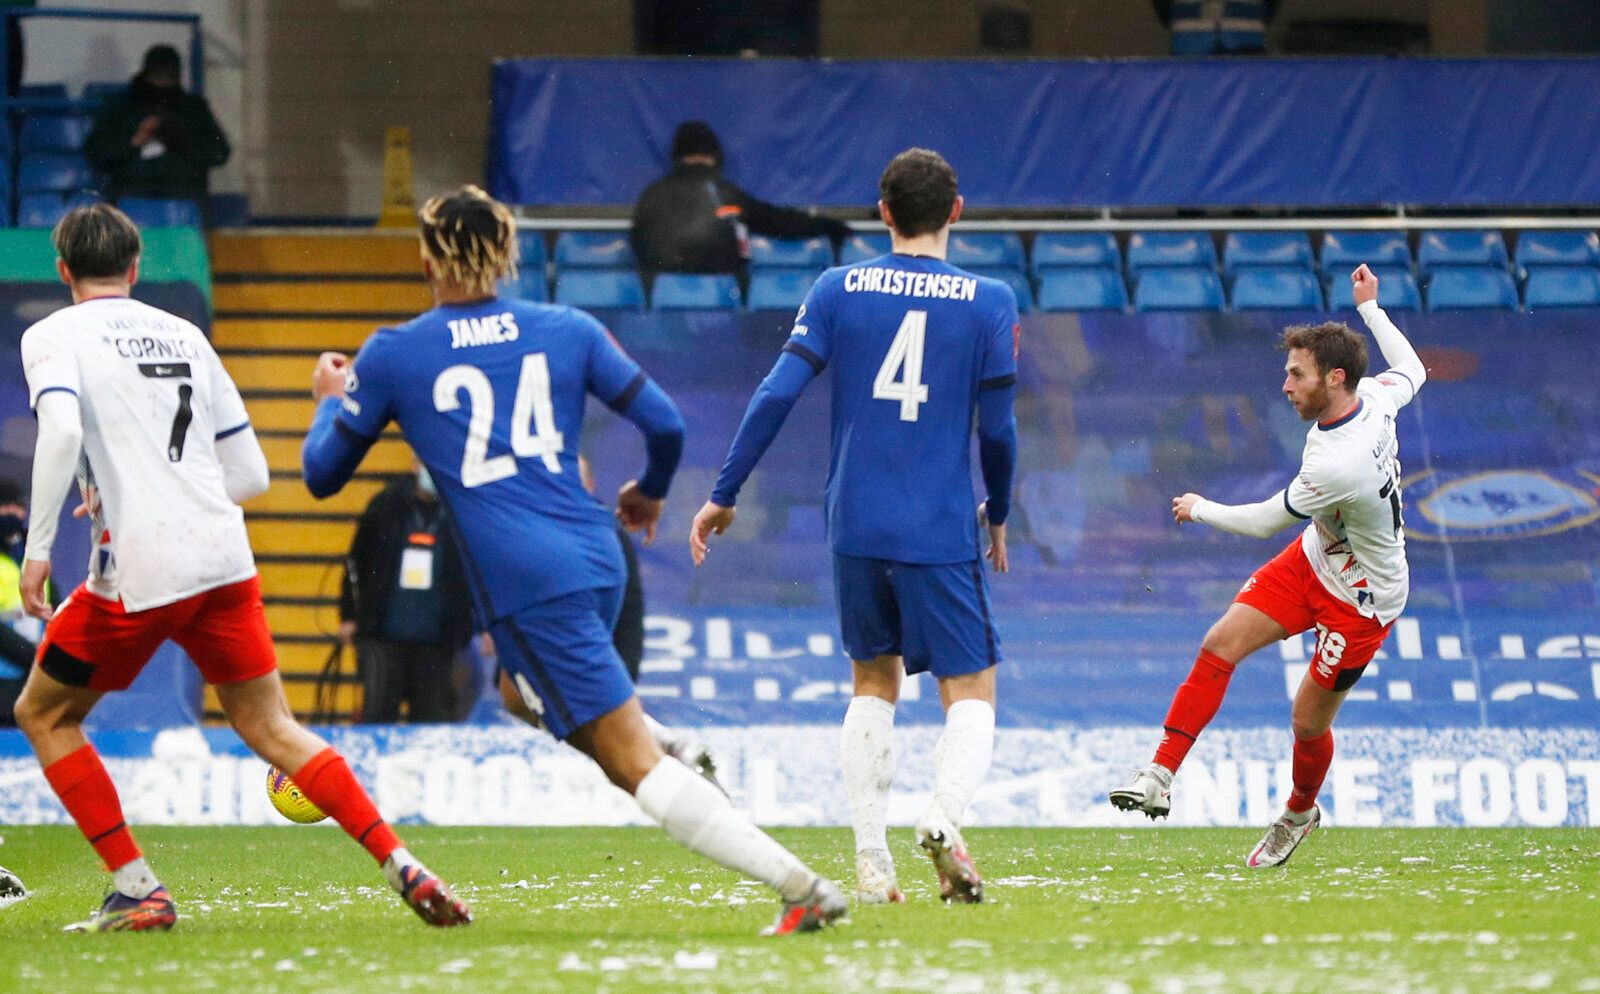 Soccer Football - FA Cup - Fourth Round - Chelsea v Luton Town - Stamford Bridge, London, Britain - January 24, 2021 Luton Town's Jordan Clark scores their first goal Action Images via Reuters/John Sibley